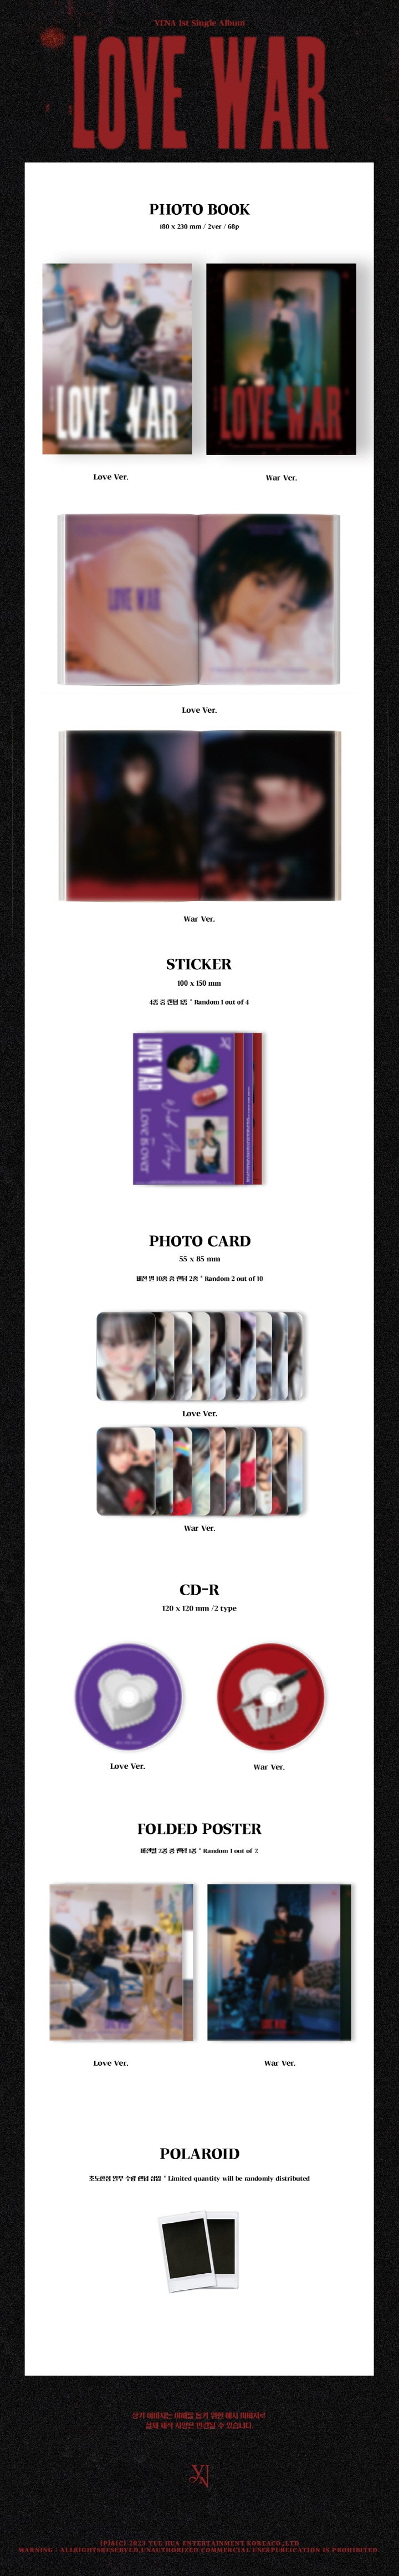 1 CD
1 Photo Book (68 pages)
1 Sticker (random out of 4 types)
1 Photo Card (random out of 2 types)
1 Folded Poster (rando...